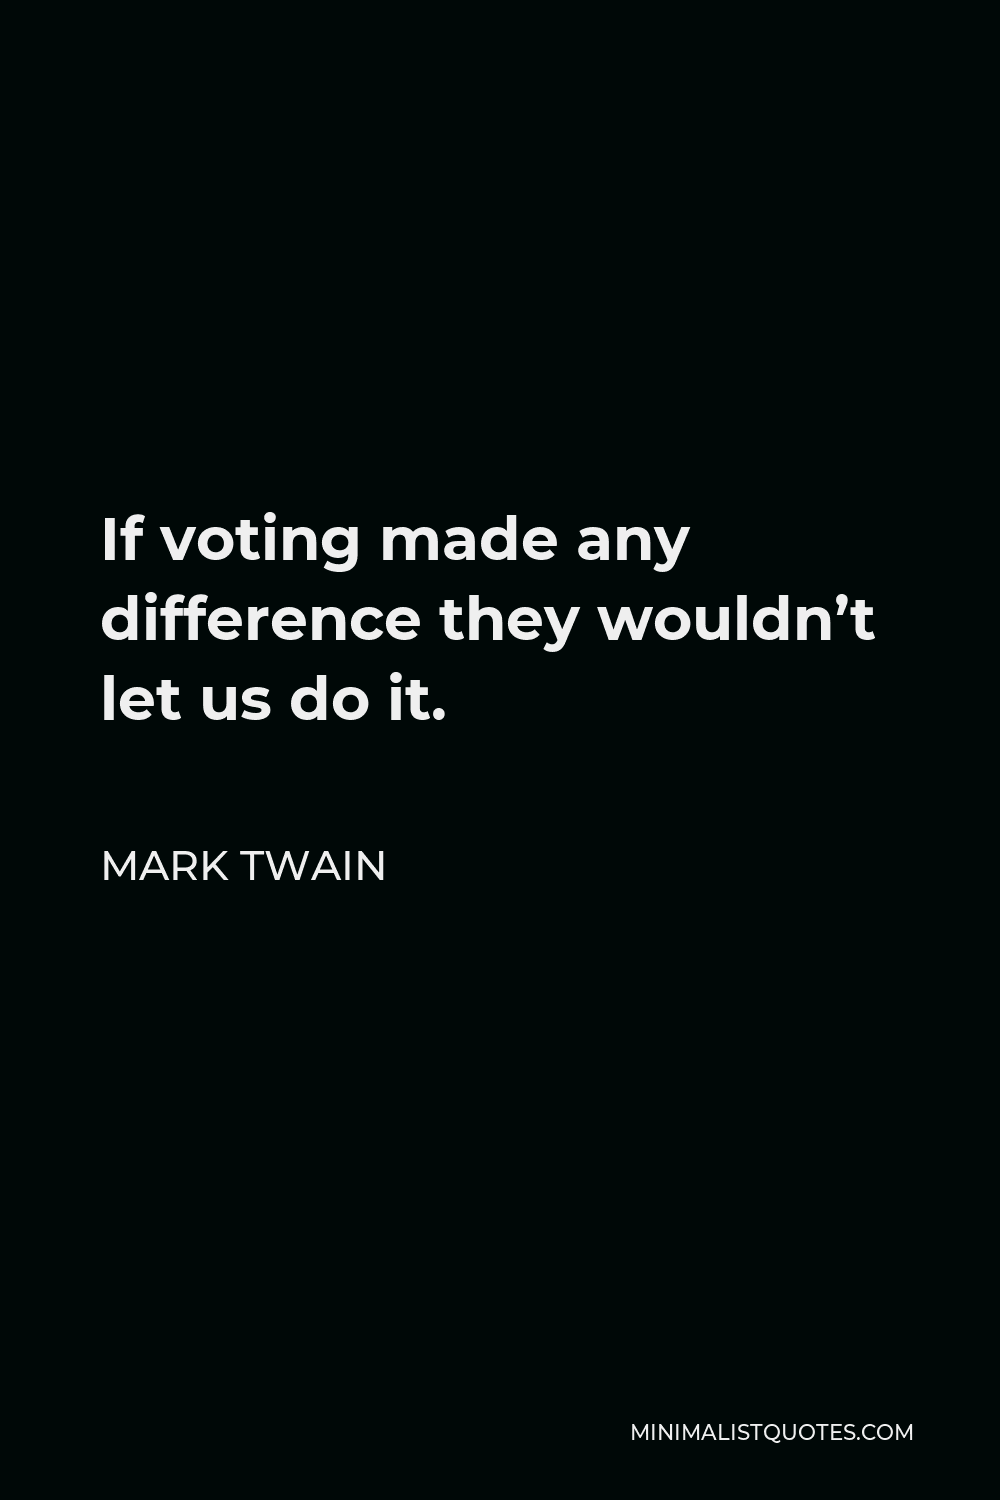 Mark Twain Quote - If voting made any difference they wouldn’t let us do it.